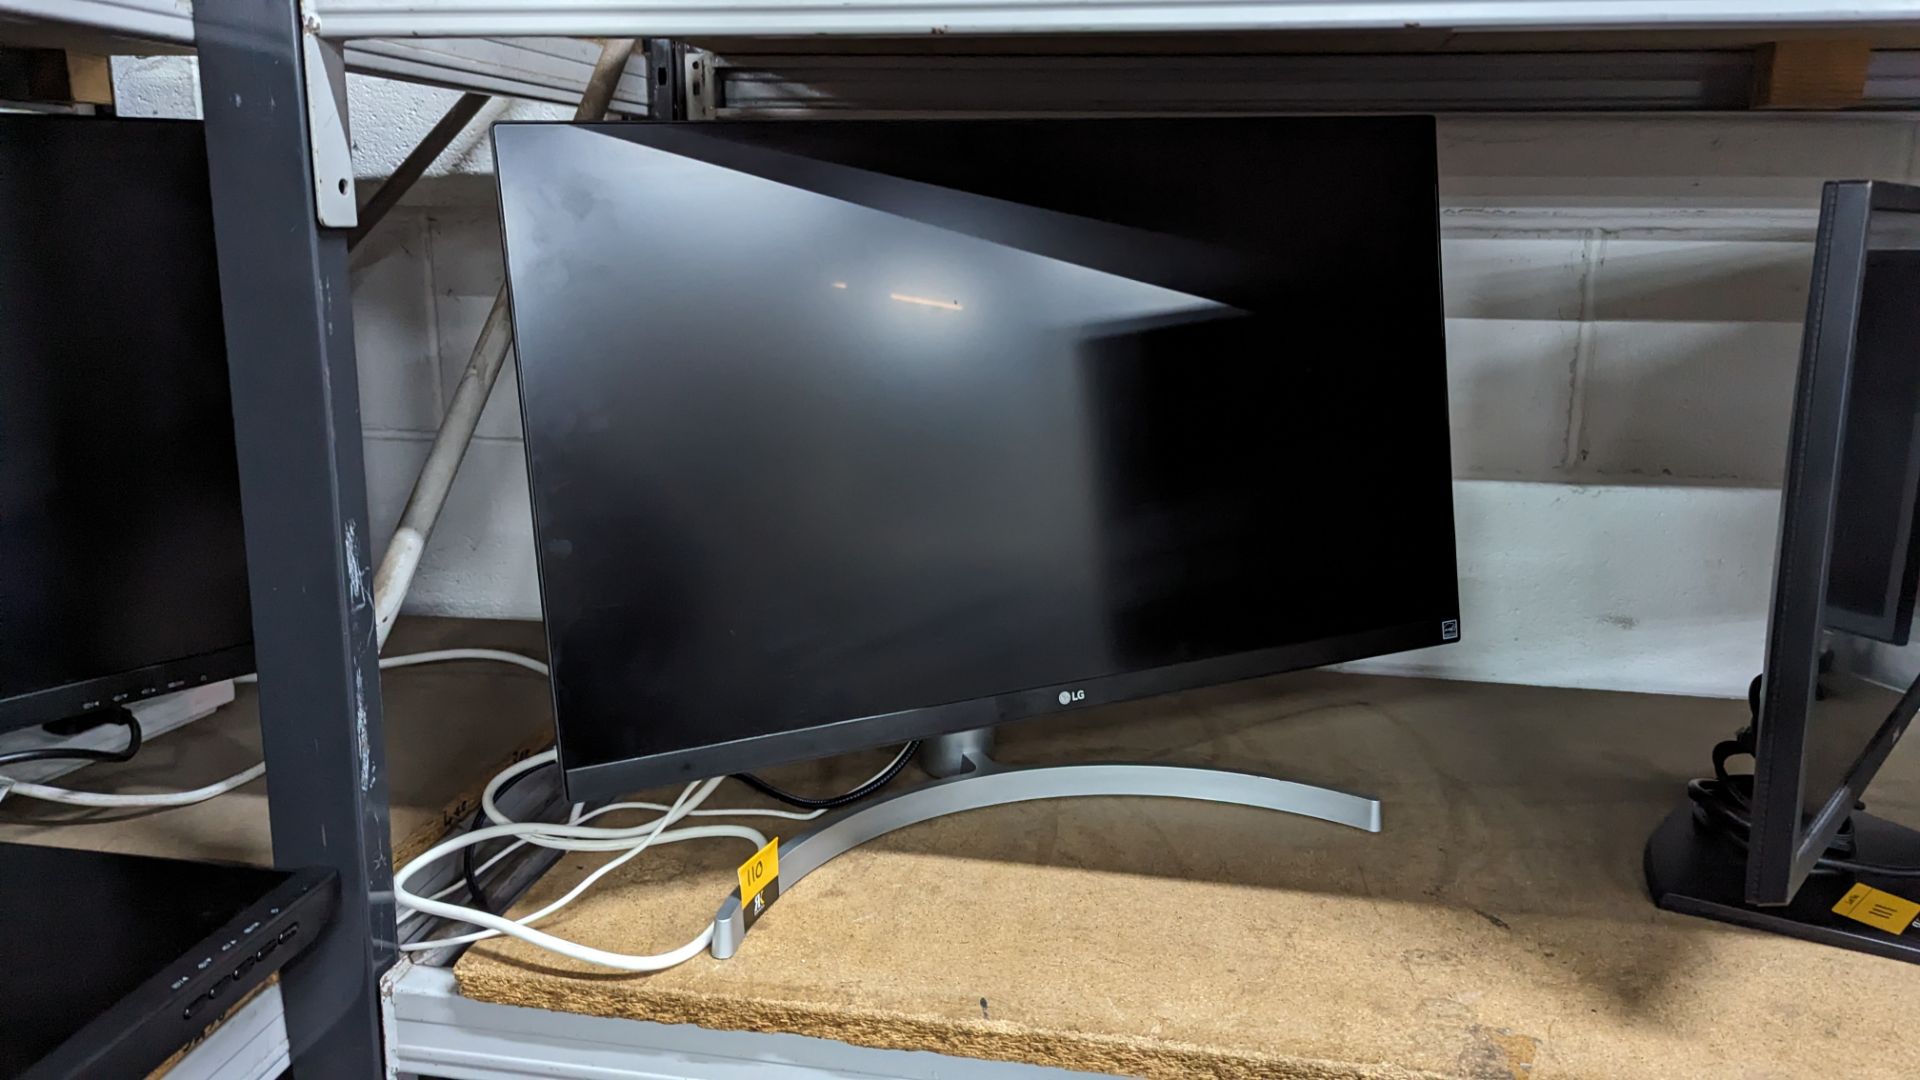 LG 27" widescreen monitor, model 27UL640-W, including external power supply and curved stand - Image 2 of 9